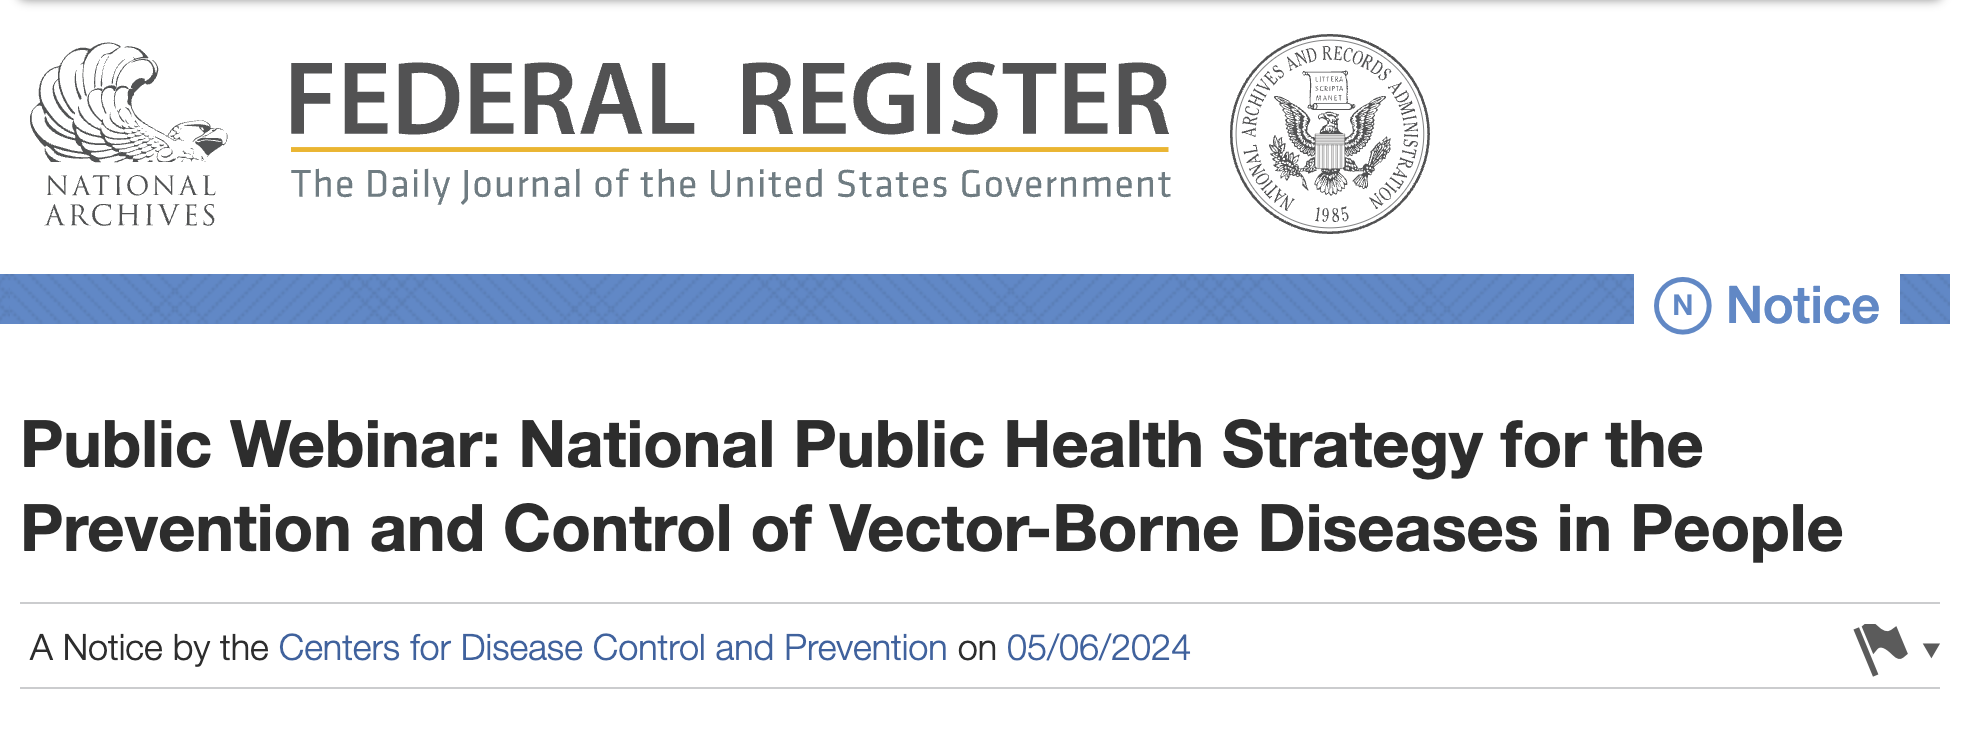 Federal Register on Strategy for Prevention and Control of Vector-Borne Diseases in People